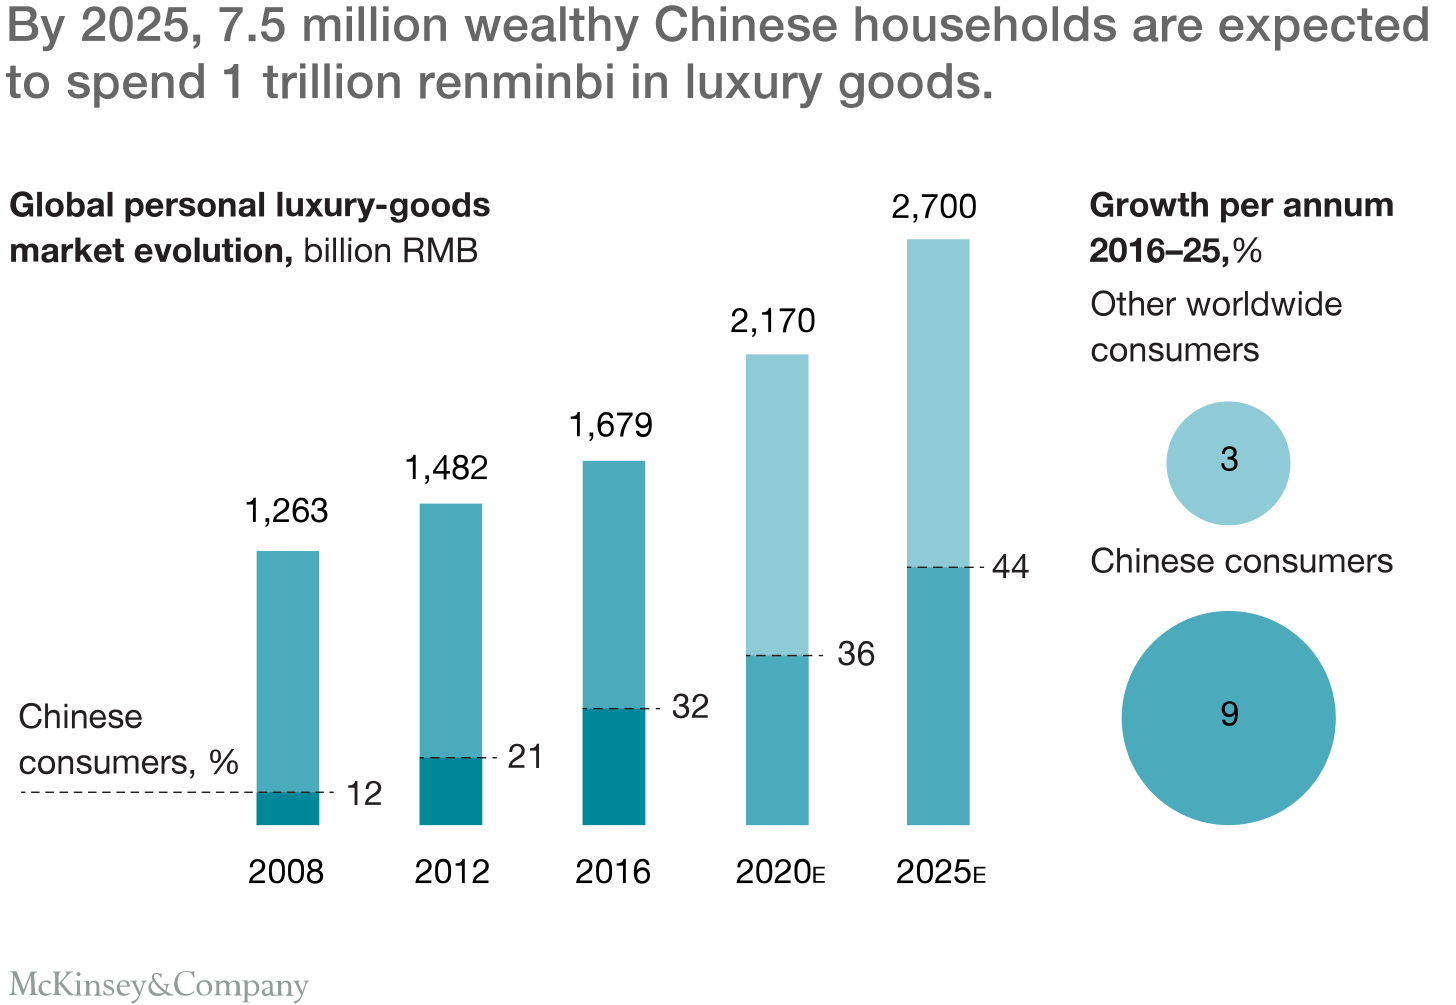 By 2025, 7.5 million wealthy Chinese households are expected to spend 1 trillion renminbi in luxury goods.